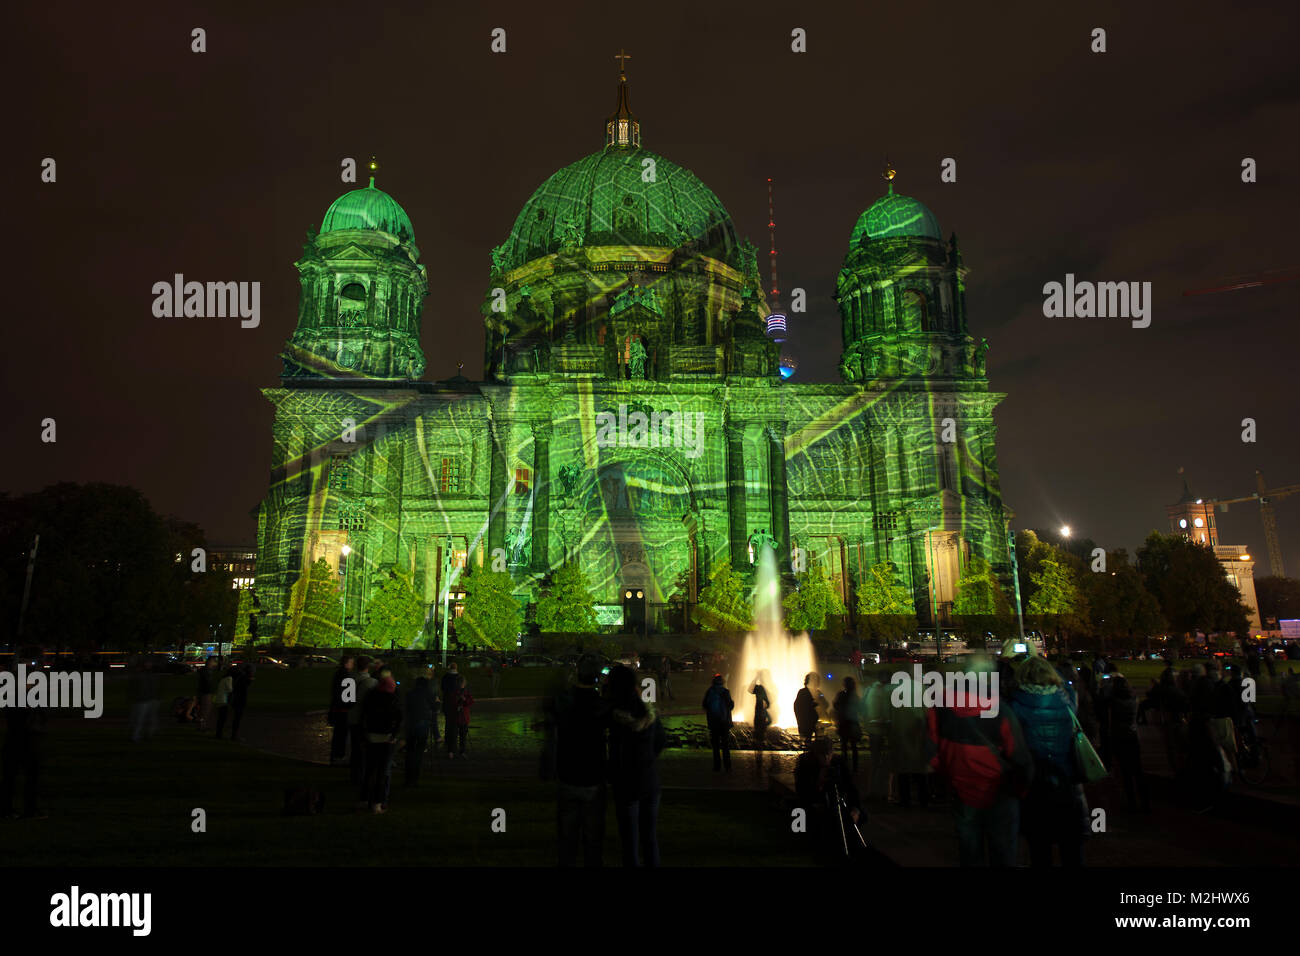 9th Festival of Light in Berlin had the official opening in PotsdamPlatz with some German celebrities. The annual Festival of Lights in Berlin where dozens of buildings are illuminated in fantastic colors and by video projection and thousands of visitors. Stock Photo